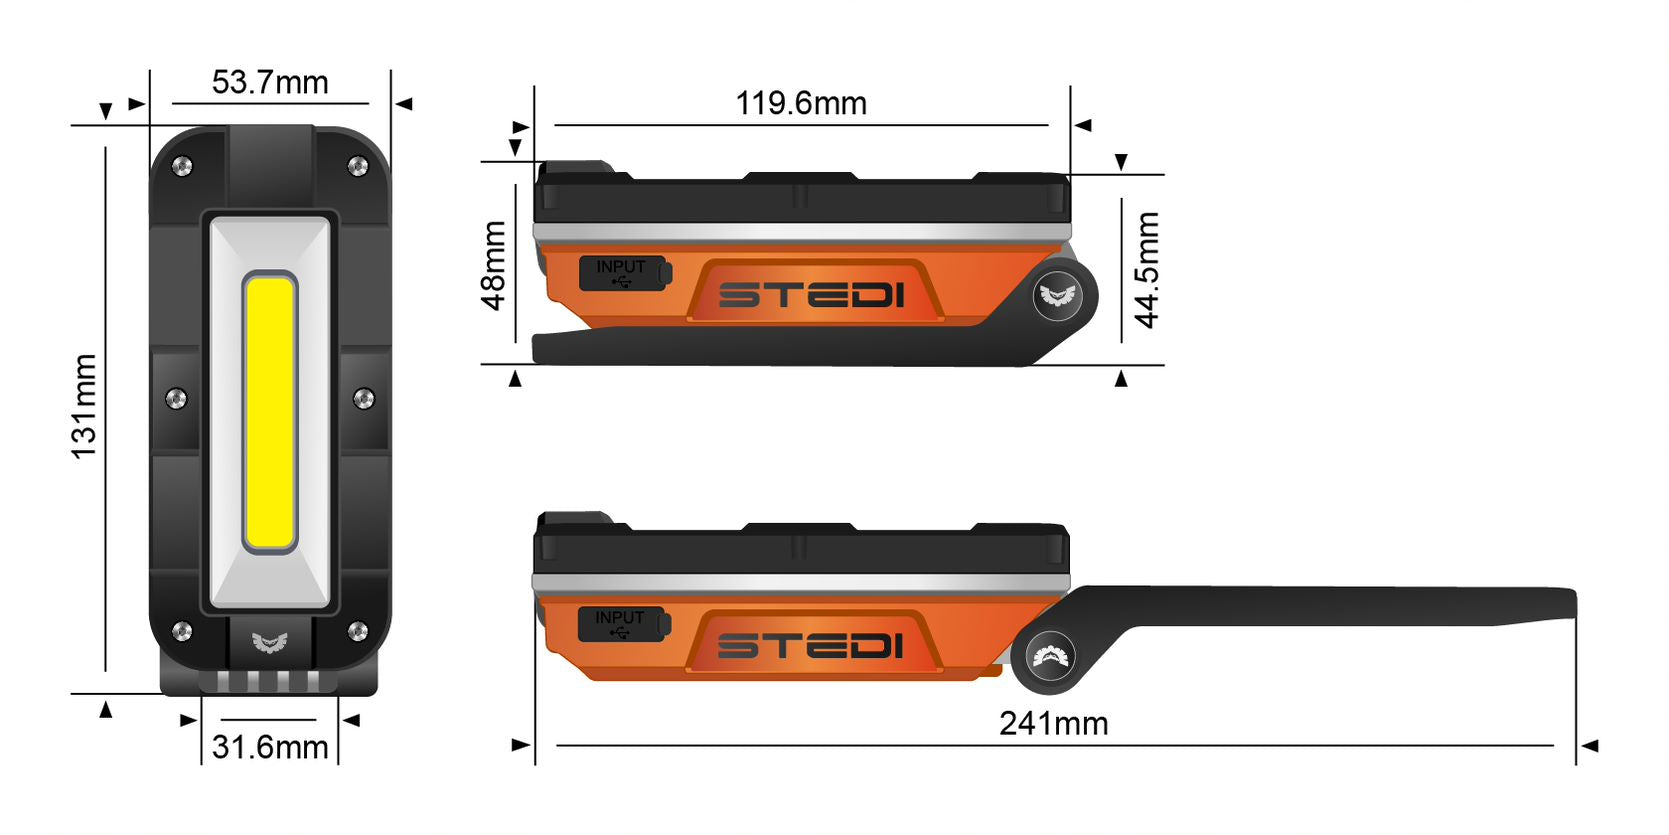 STEDI T1000 LED Arbeits- & Camping Lampe